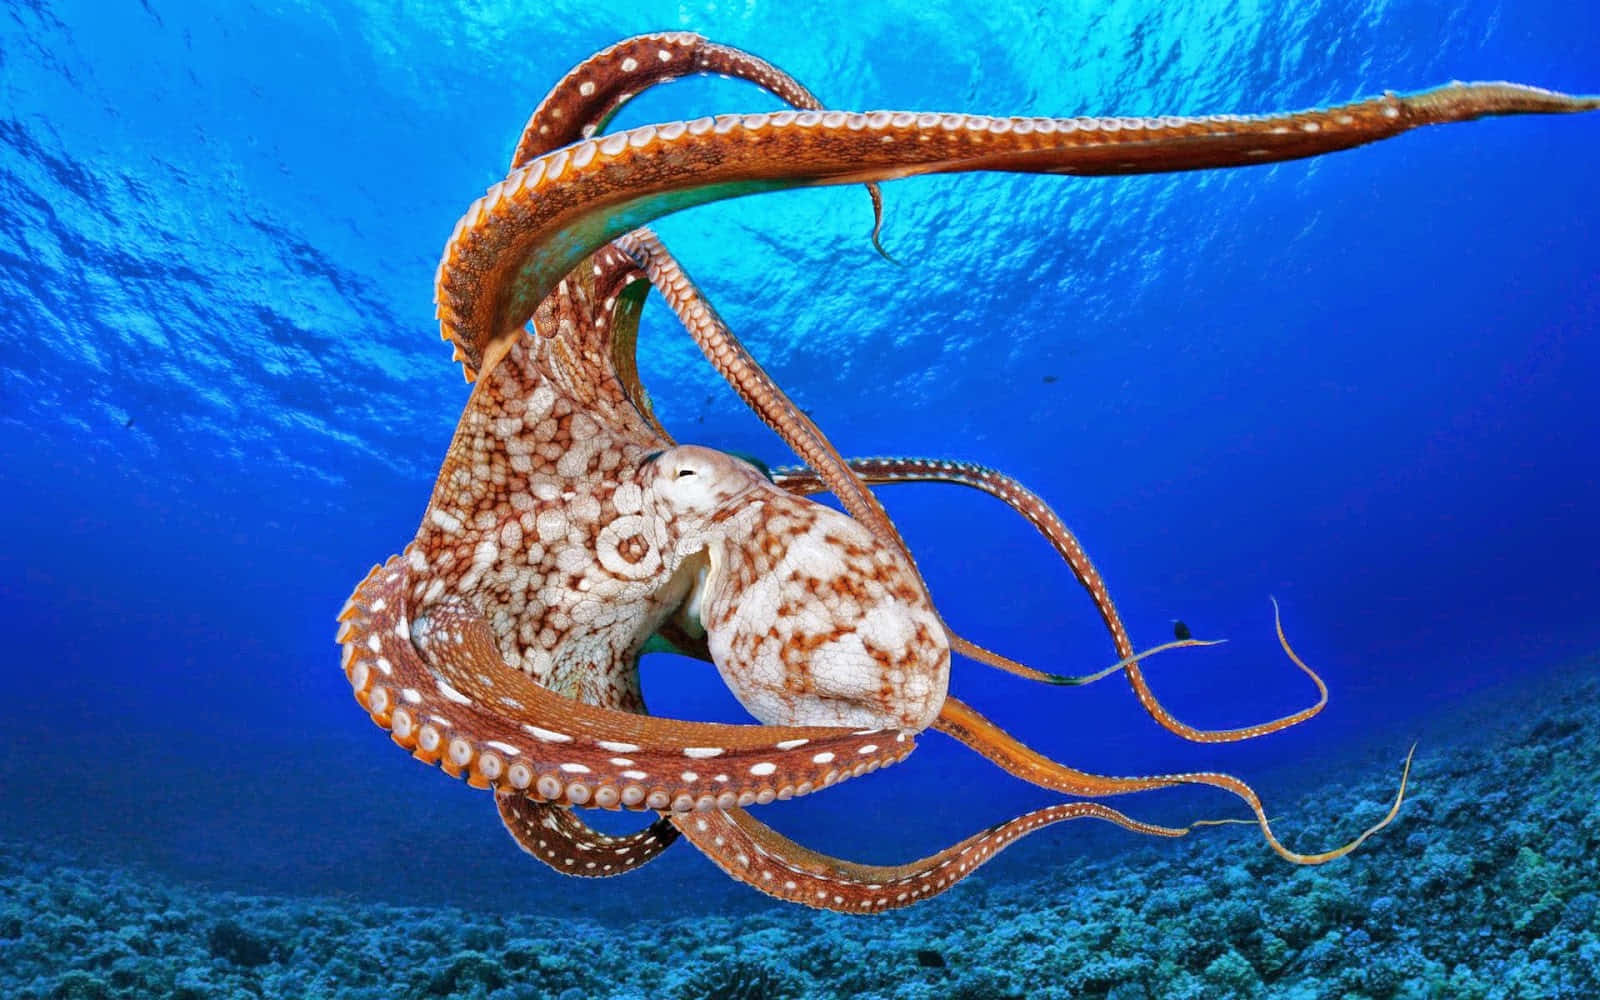 Octopuses Have Evolved to Adapt to Their Surroundings